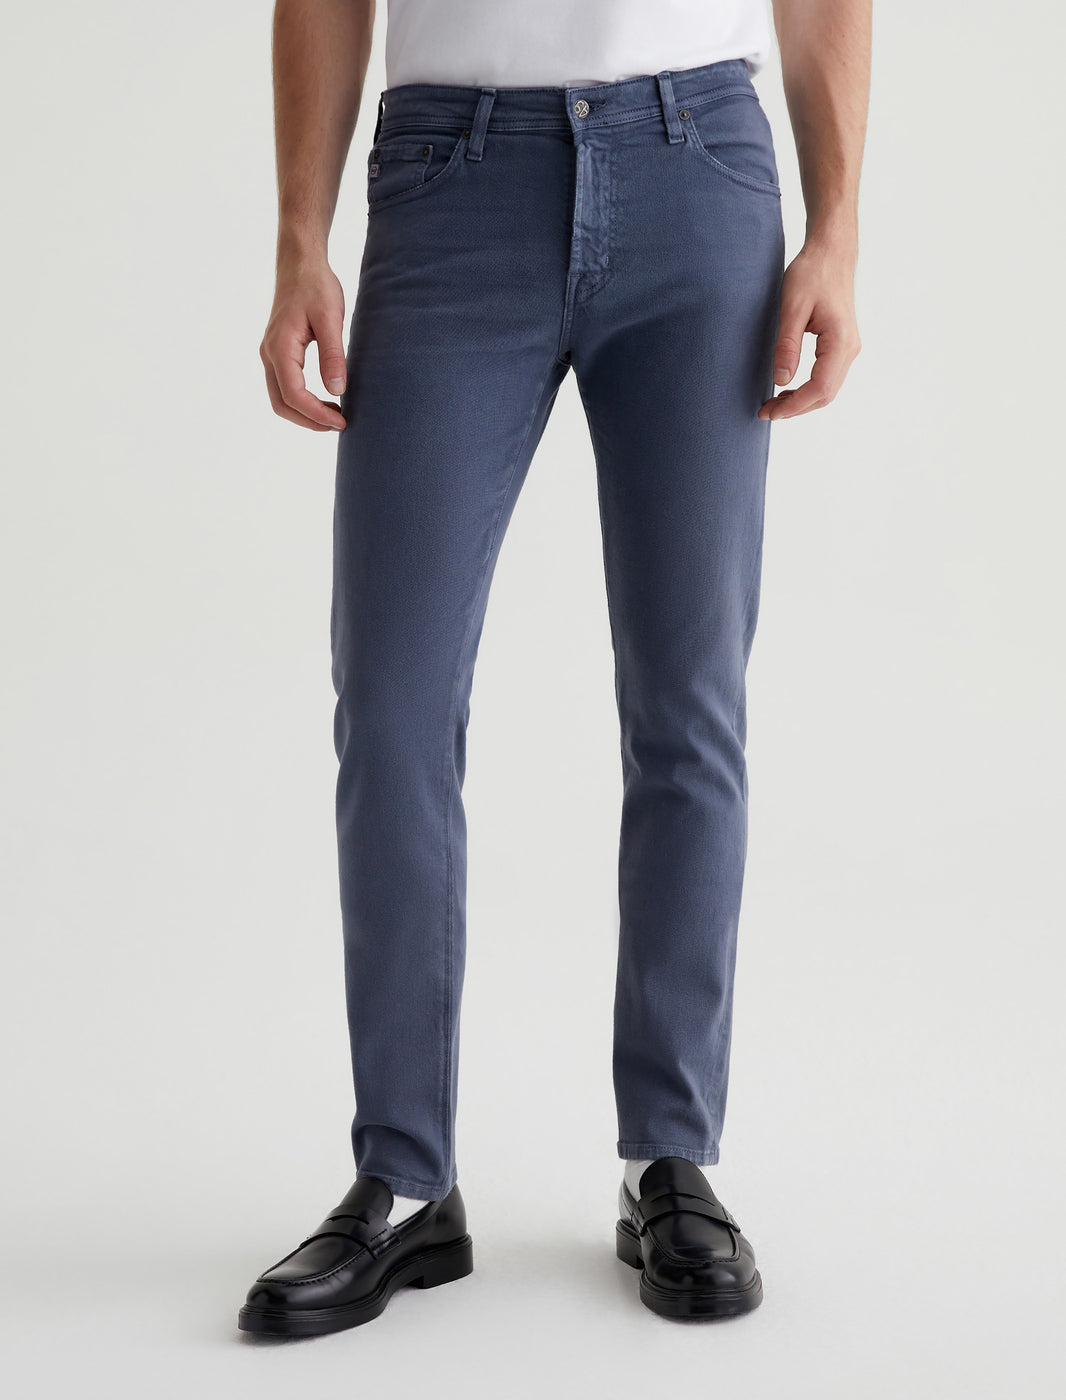 Ellington Official Years 2 Jeans Mens at Store Tellis AG